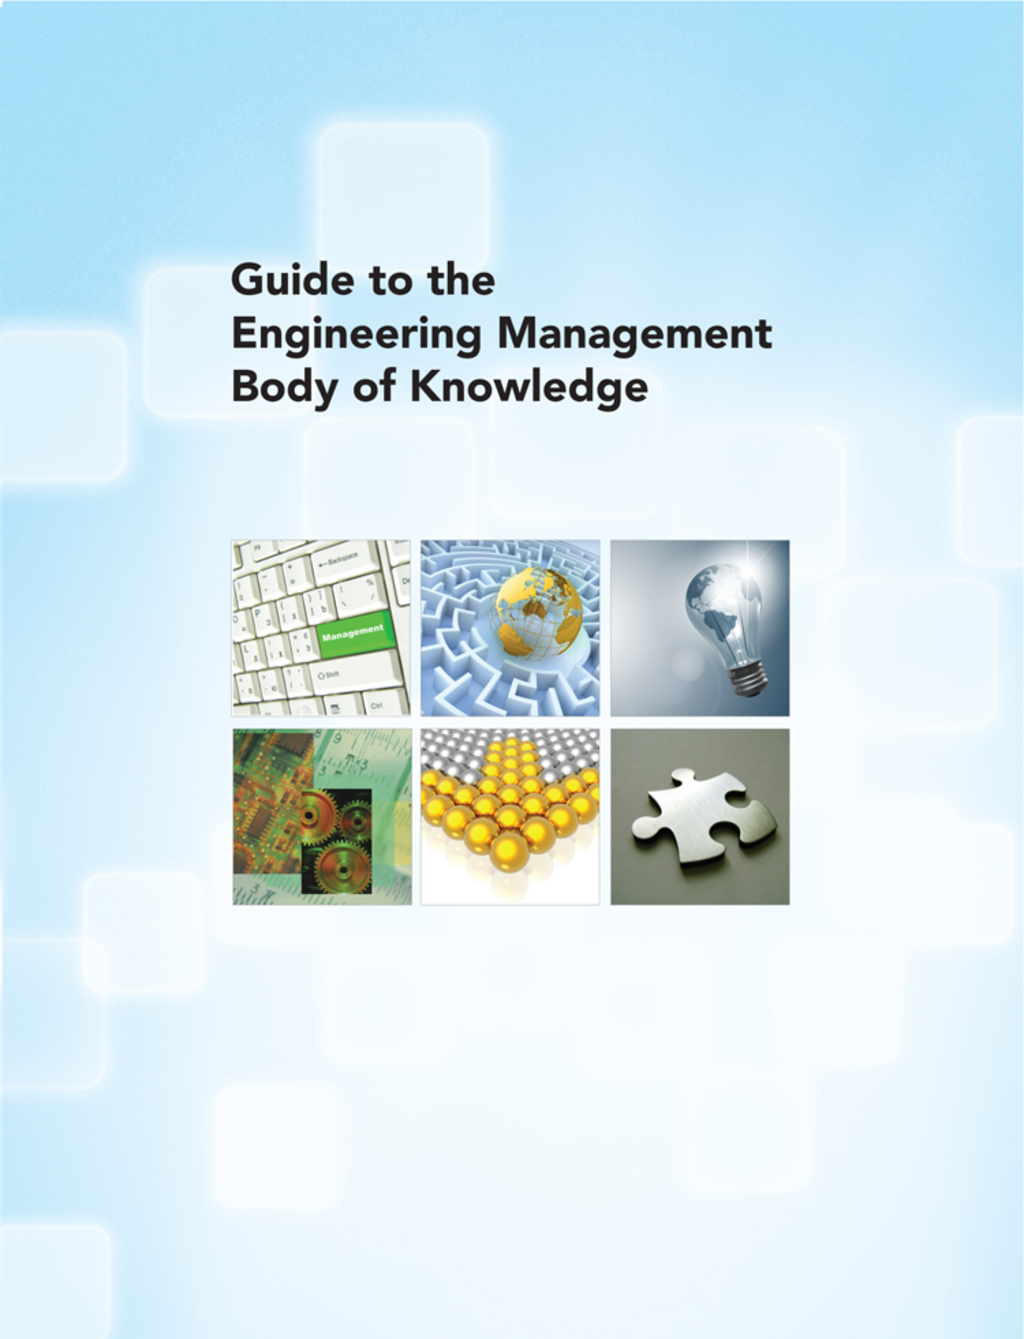 Guide to the Engineering Management Body of Knowledge (eBook) - ASME,